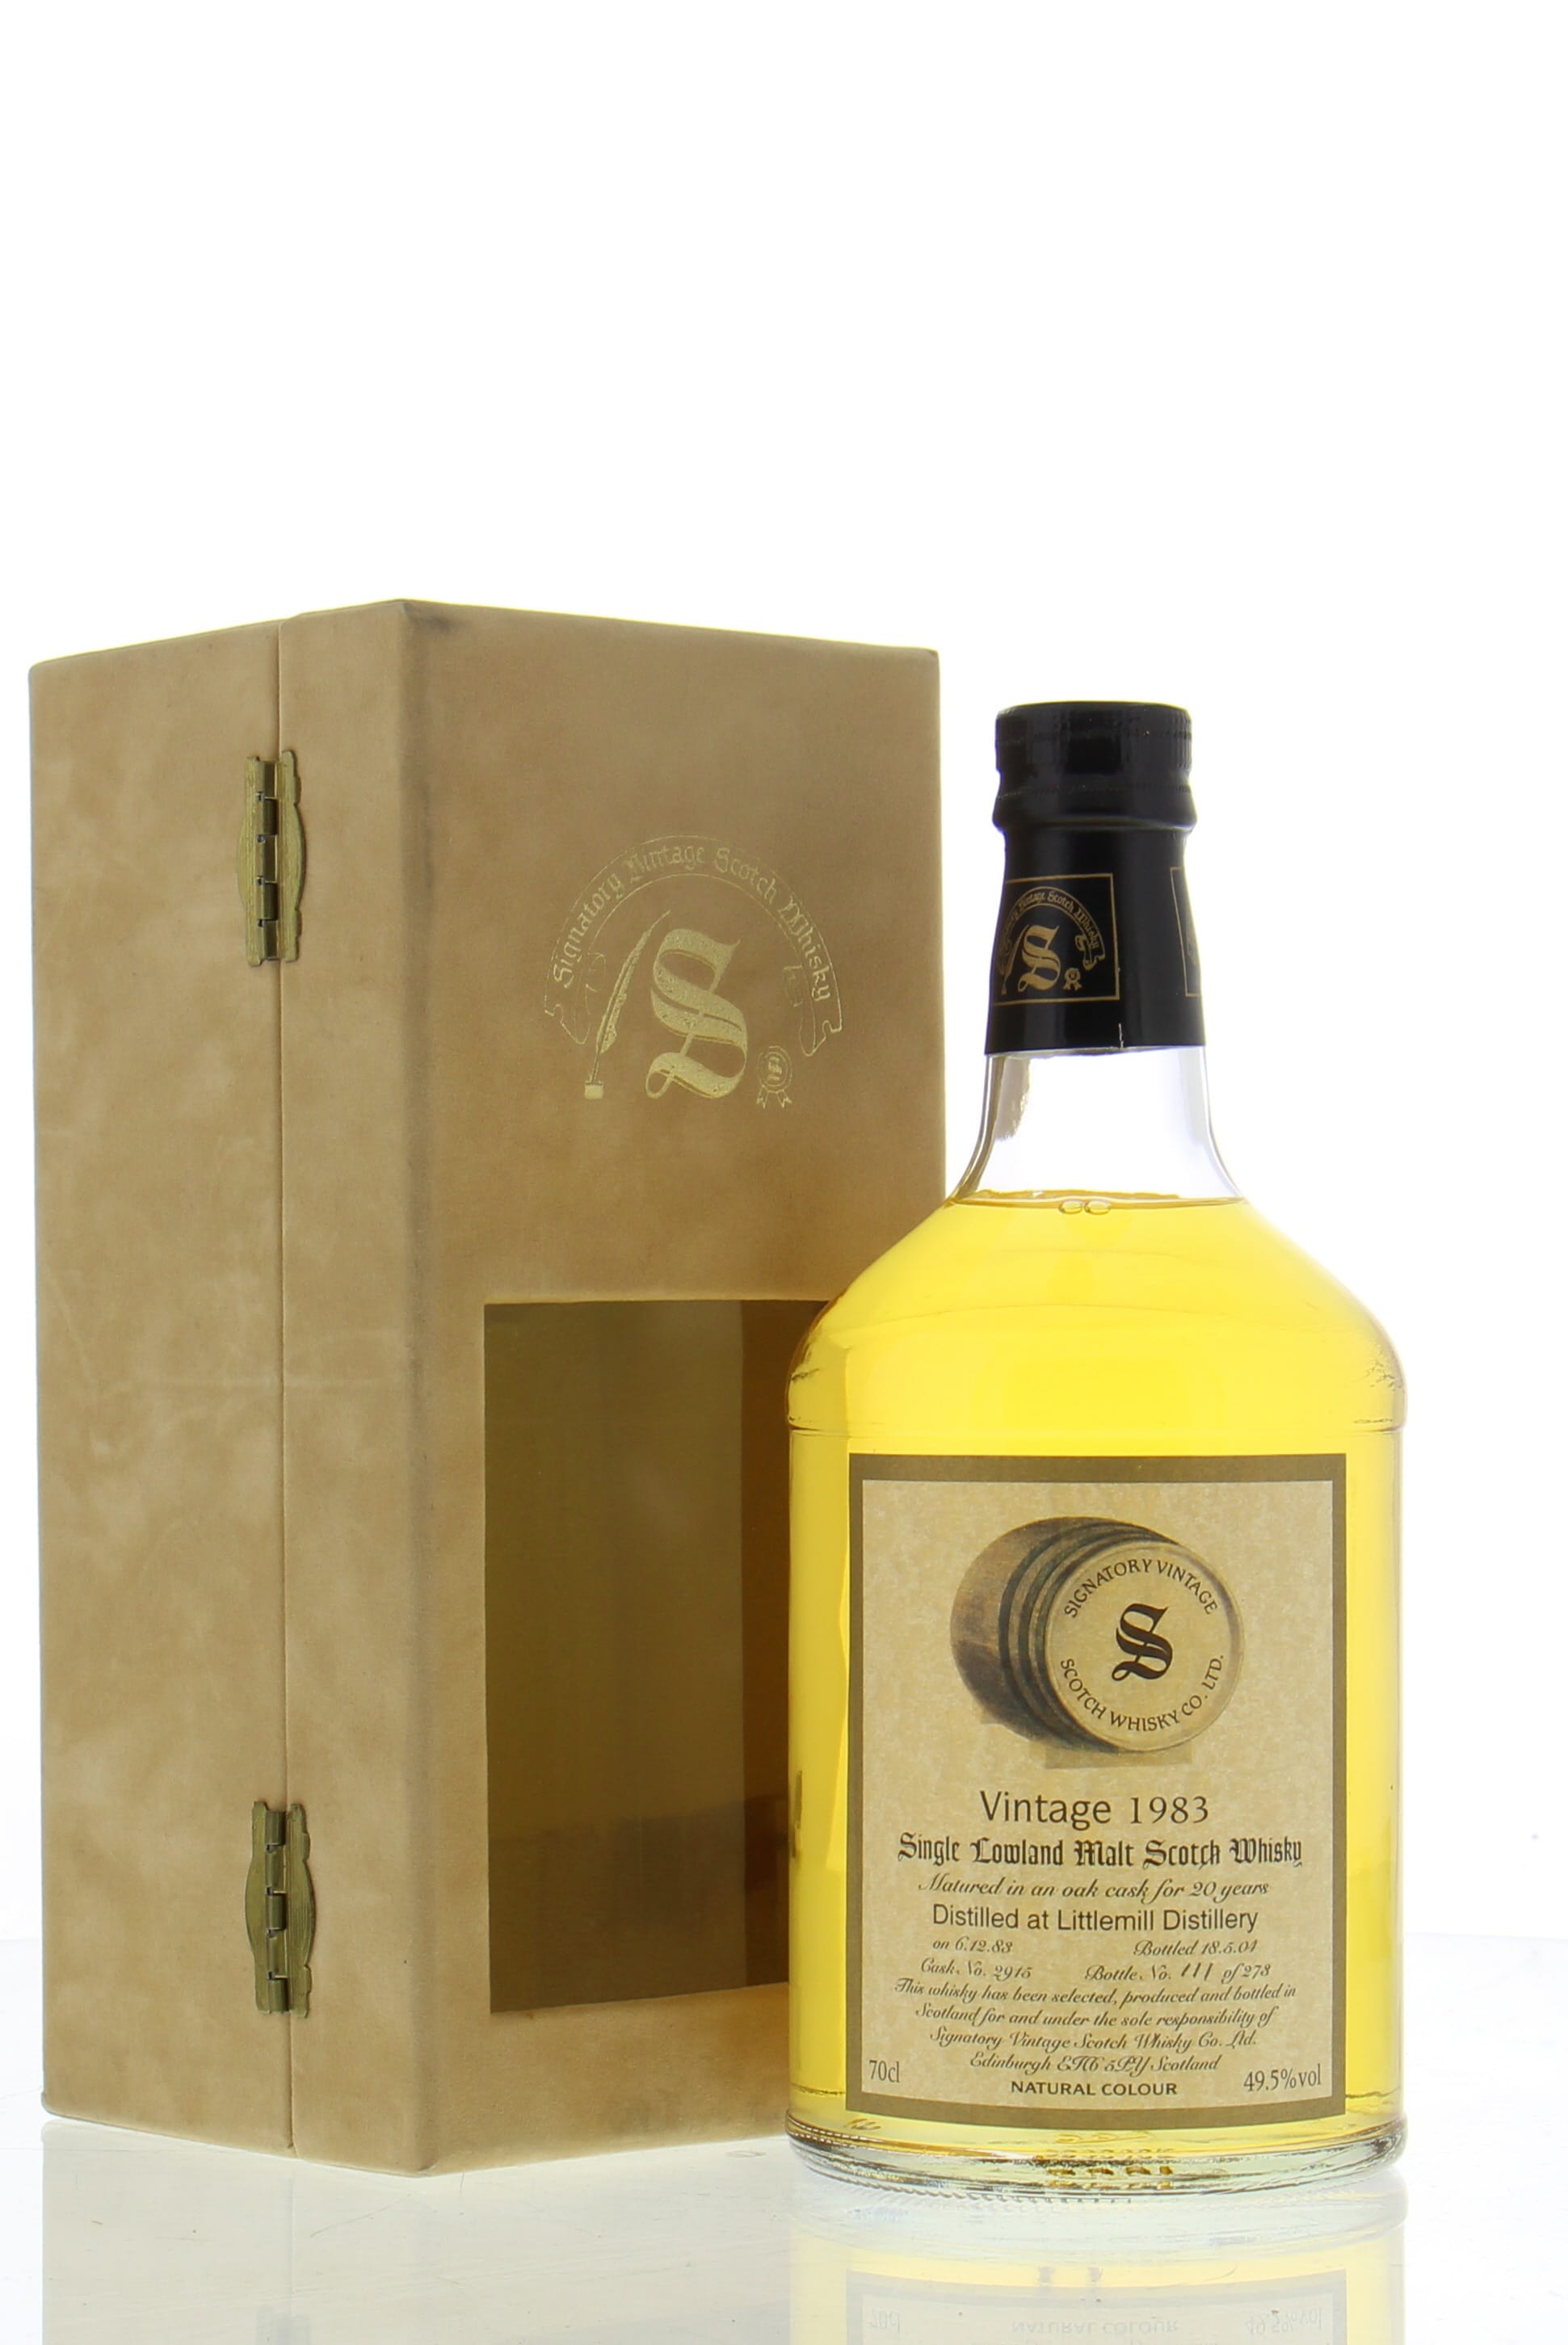 Littlemill - 20 Years Old Signatory Vintage Cask:2915 59.5% 1983 In Original Container